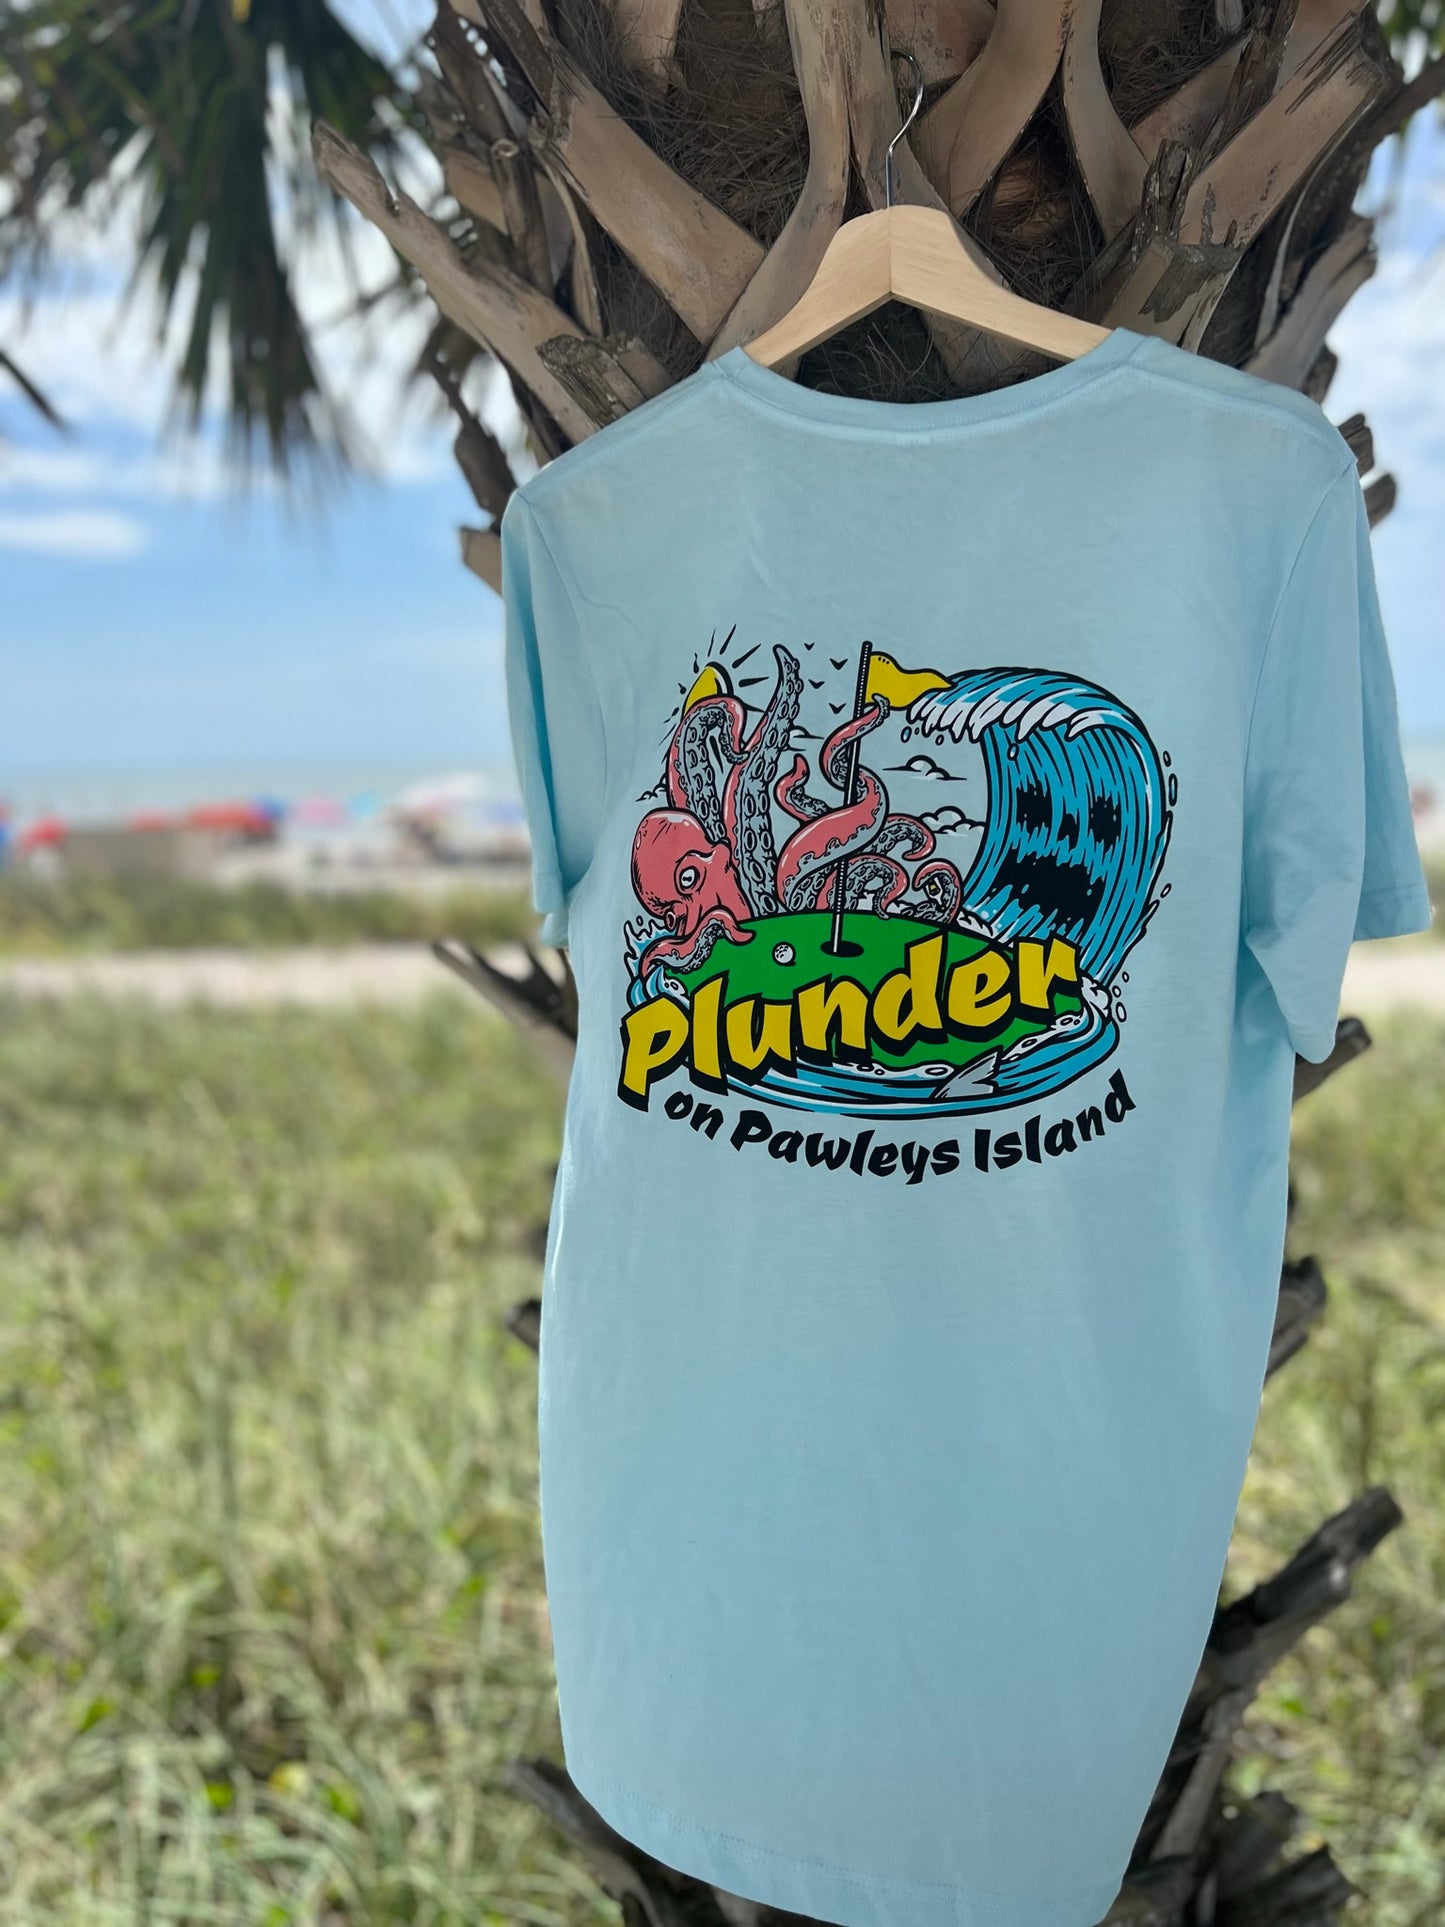 The Plunder on Pawleys Island official tshirt